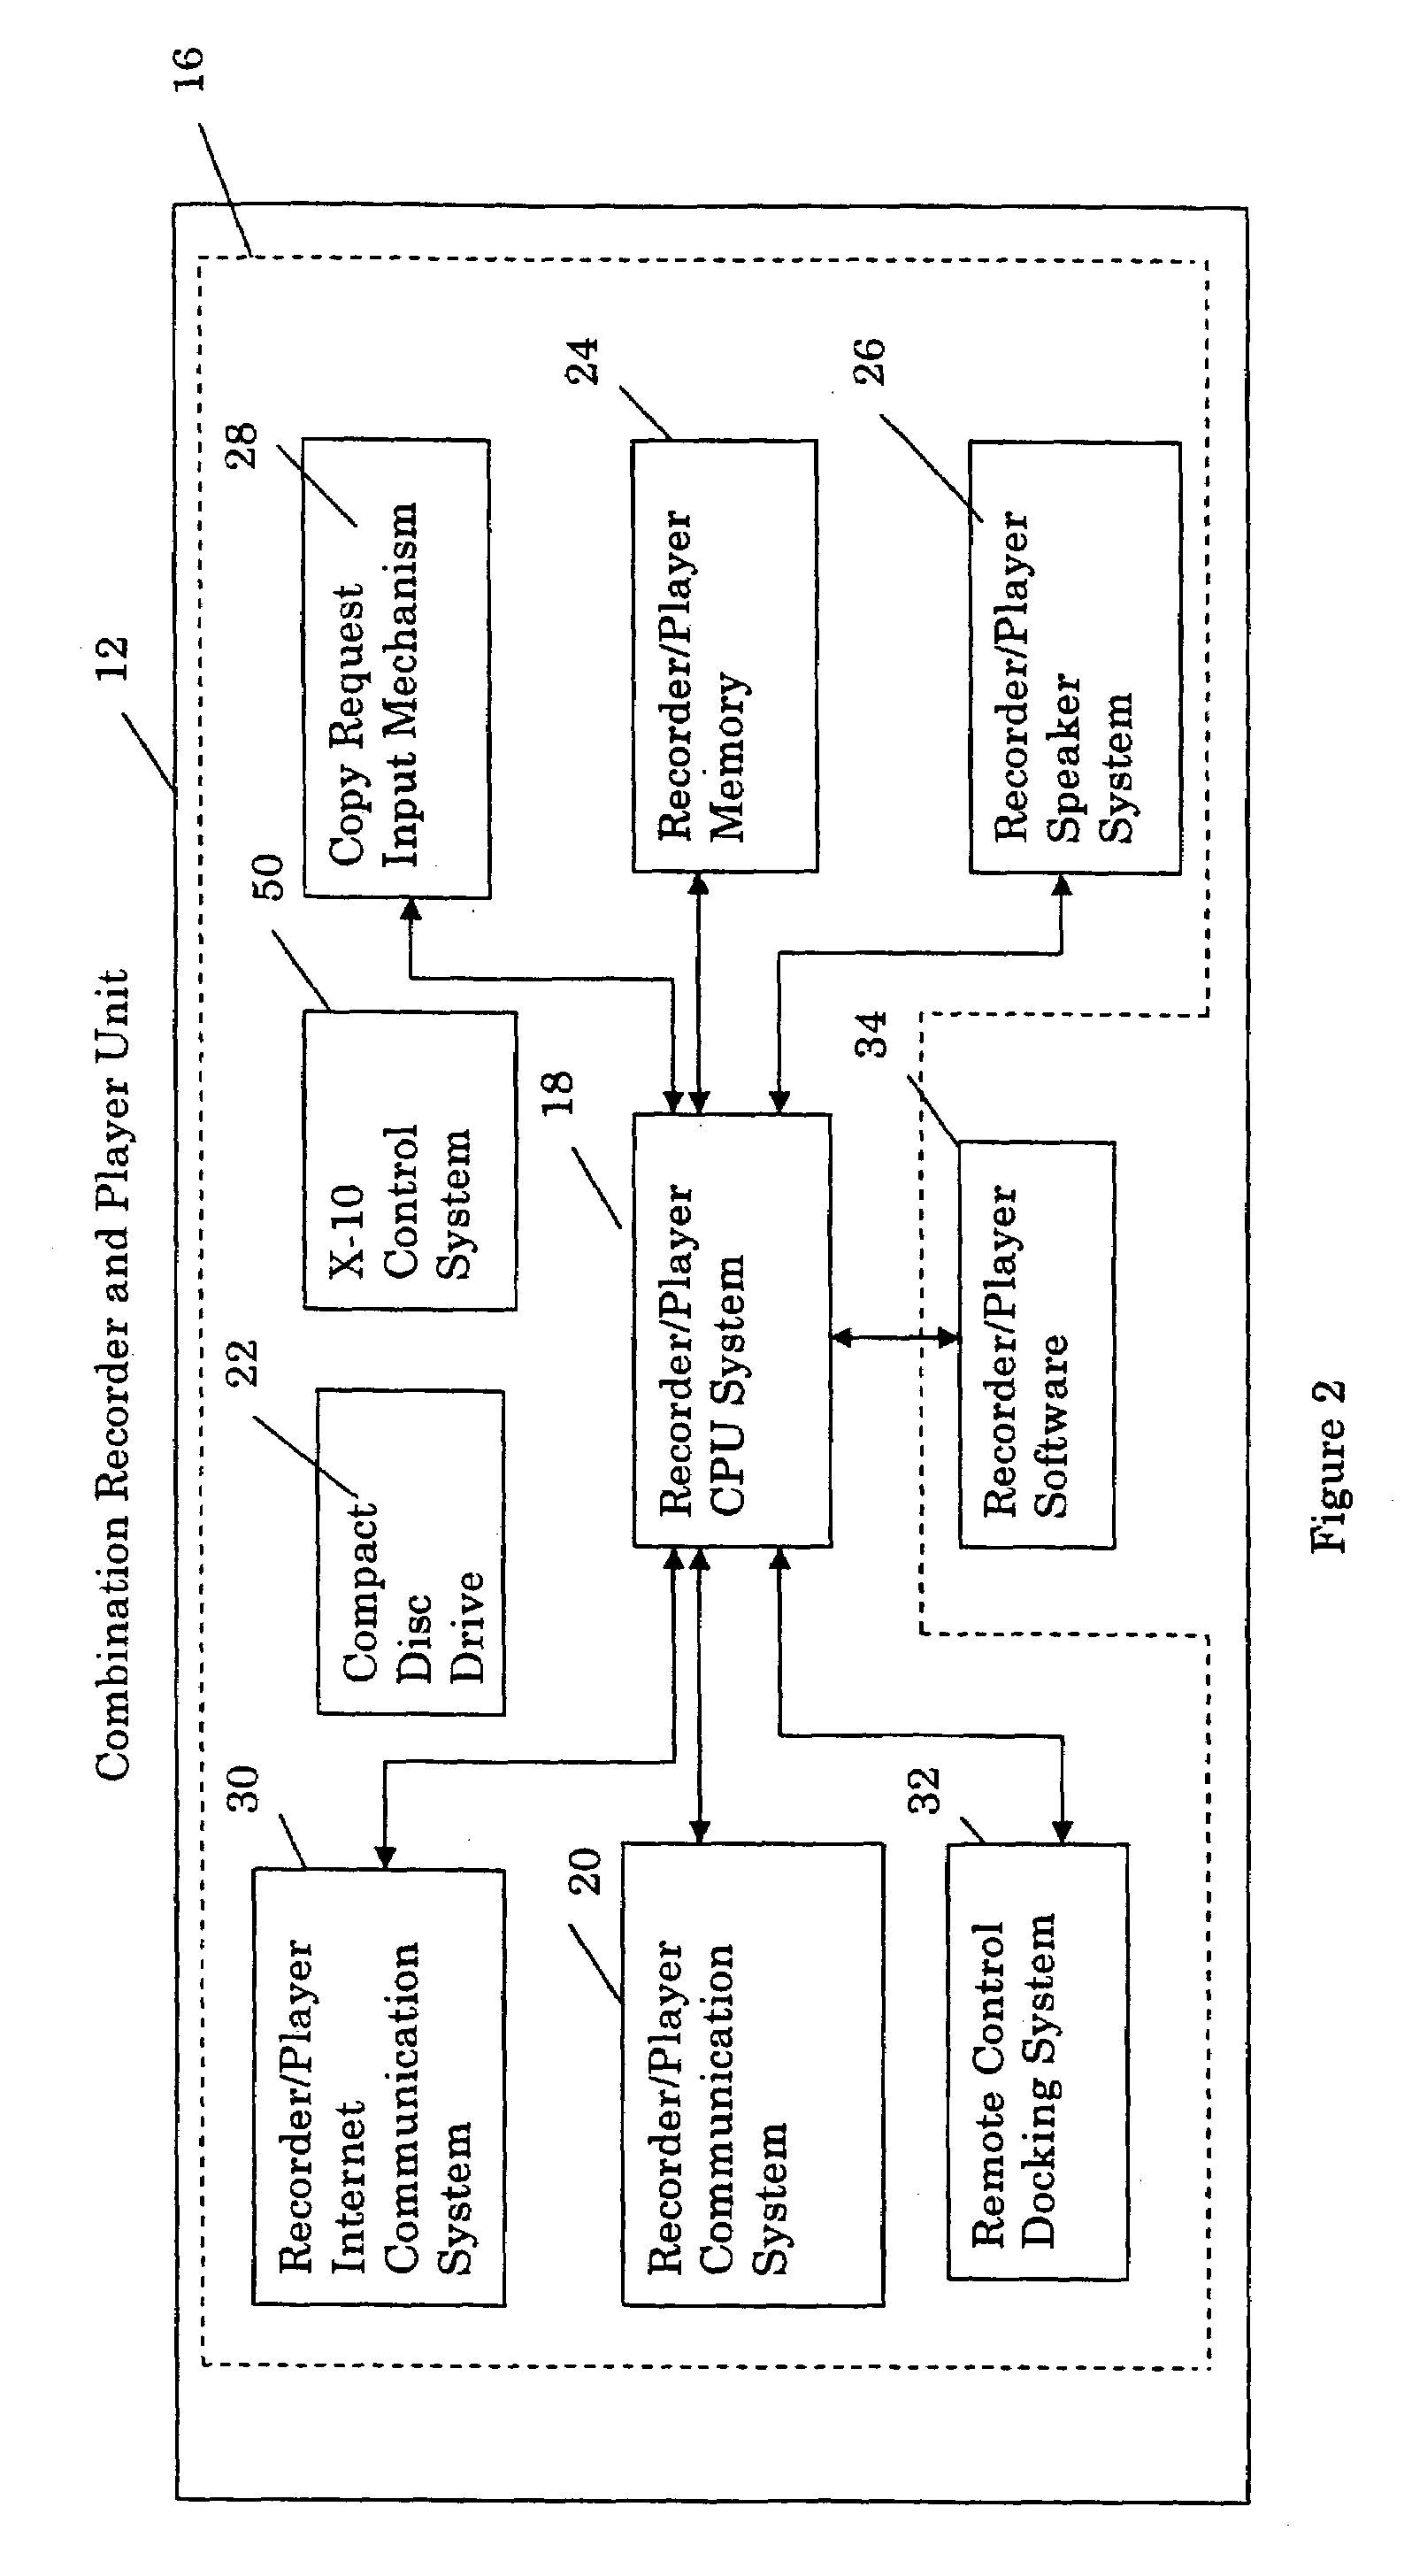 System and method for distributing music to customers over the internet using uniquely identified proprietary devices